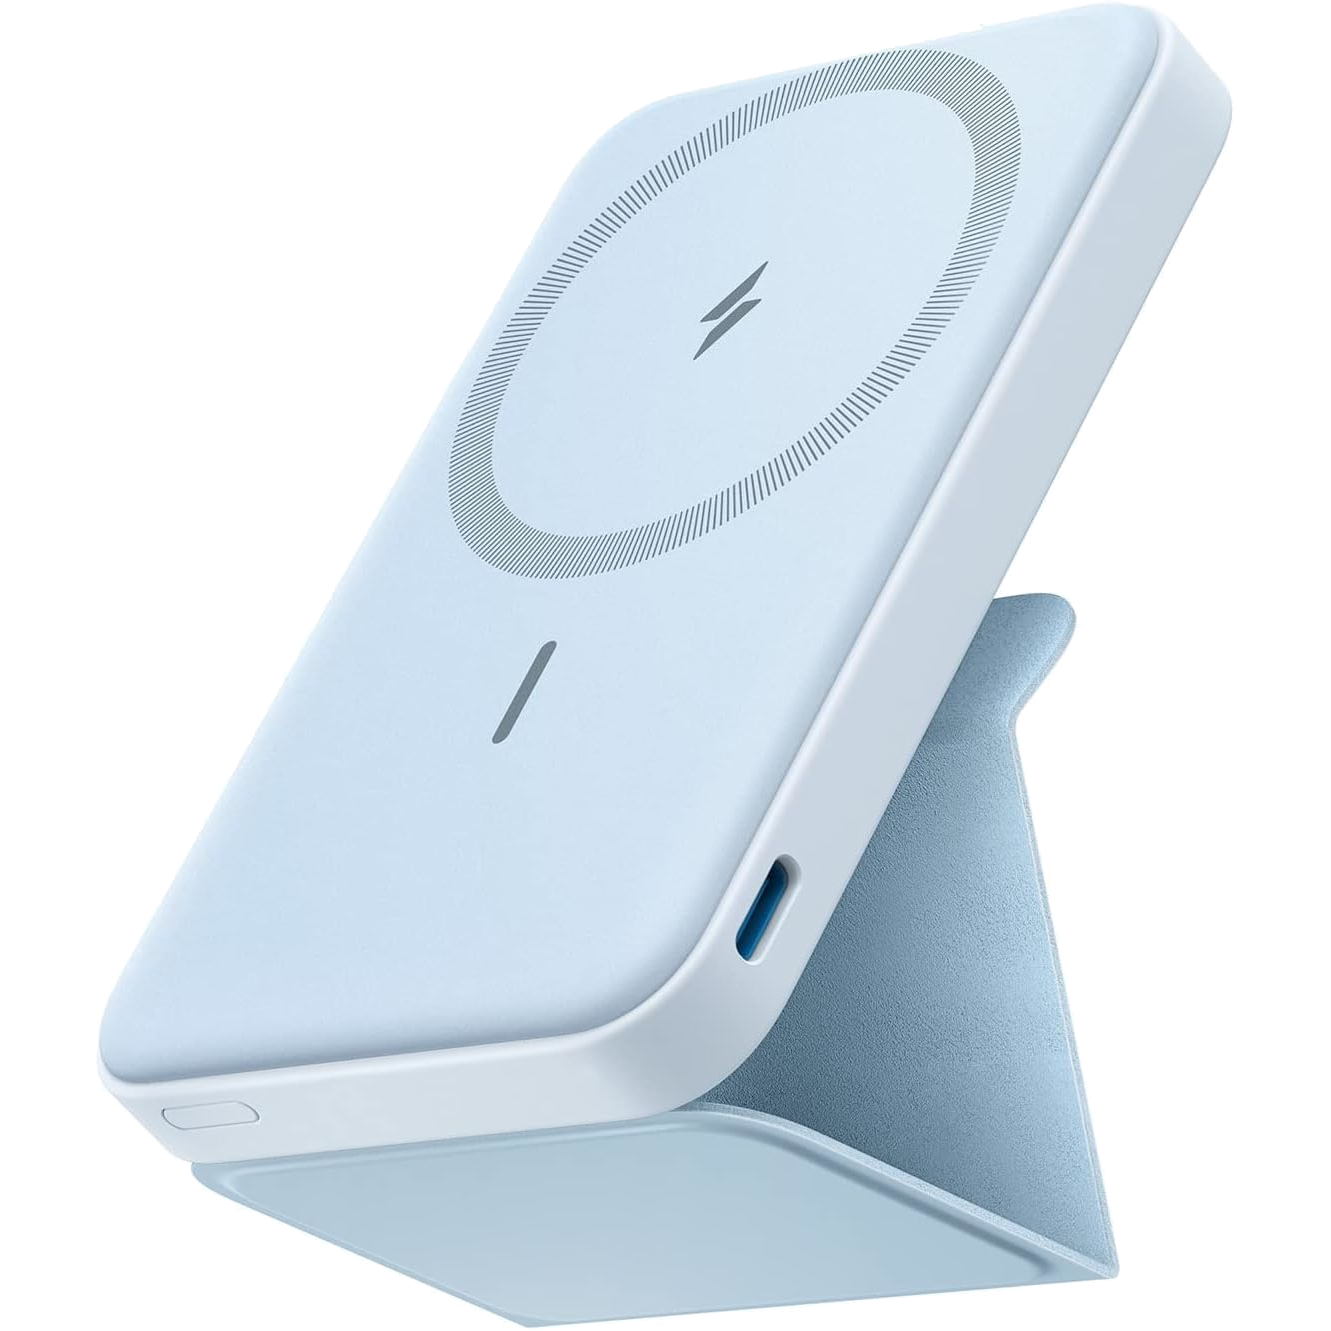 A blue Anker Magnetic Battery with its stand deployed seen front the front and side at an angle.